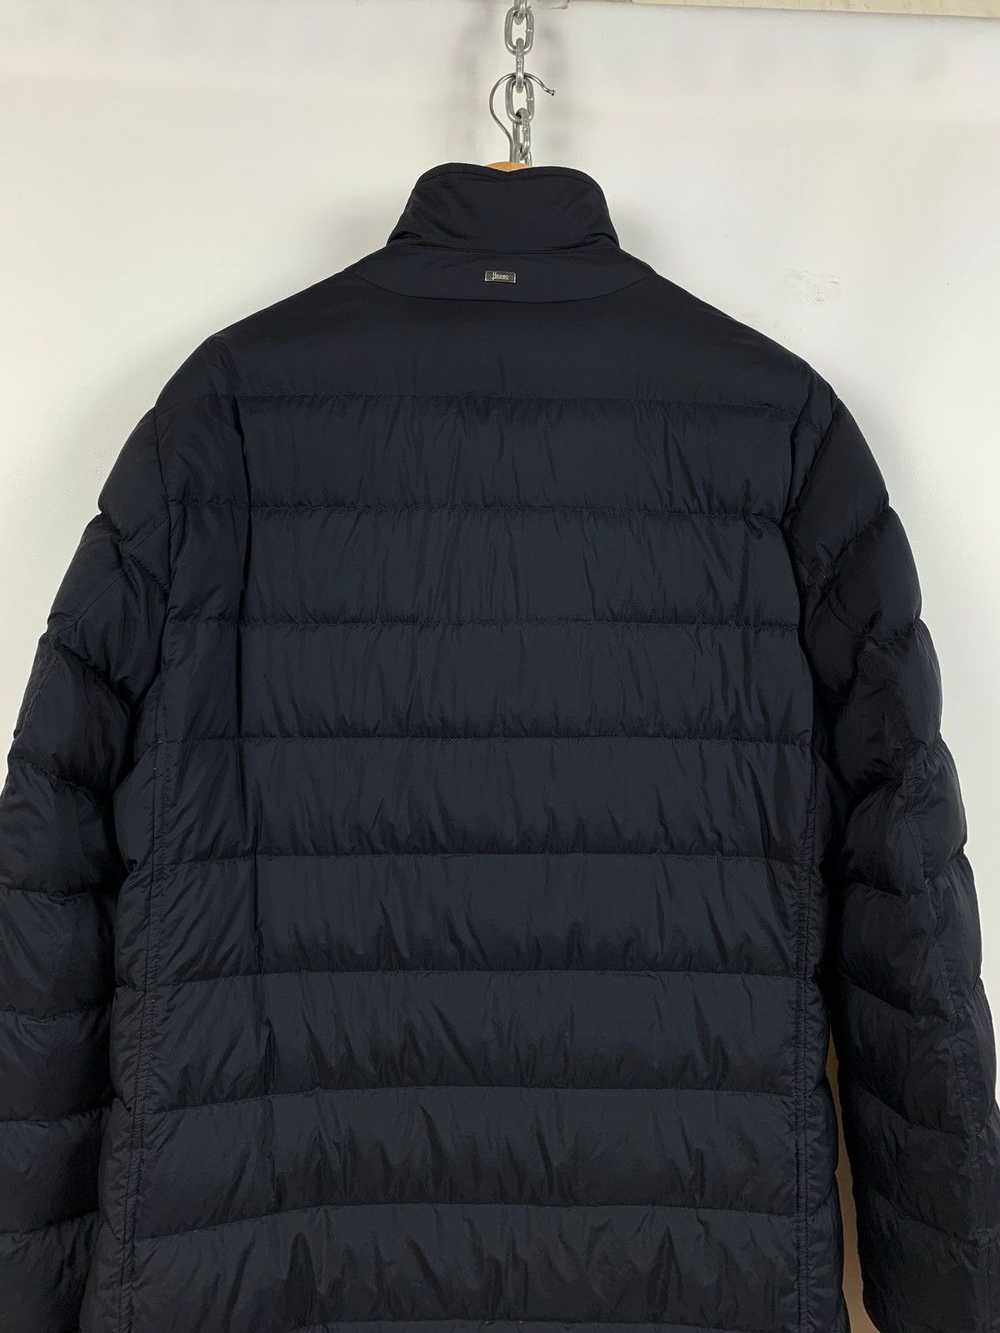 Herno Herno Navy Blue Quilted Down Jacket - image 11